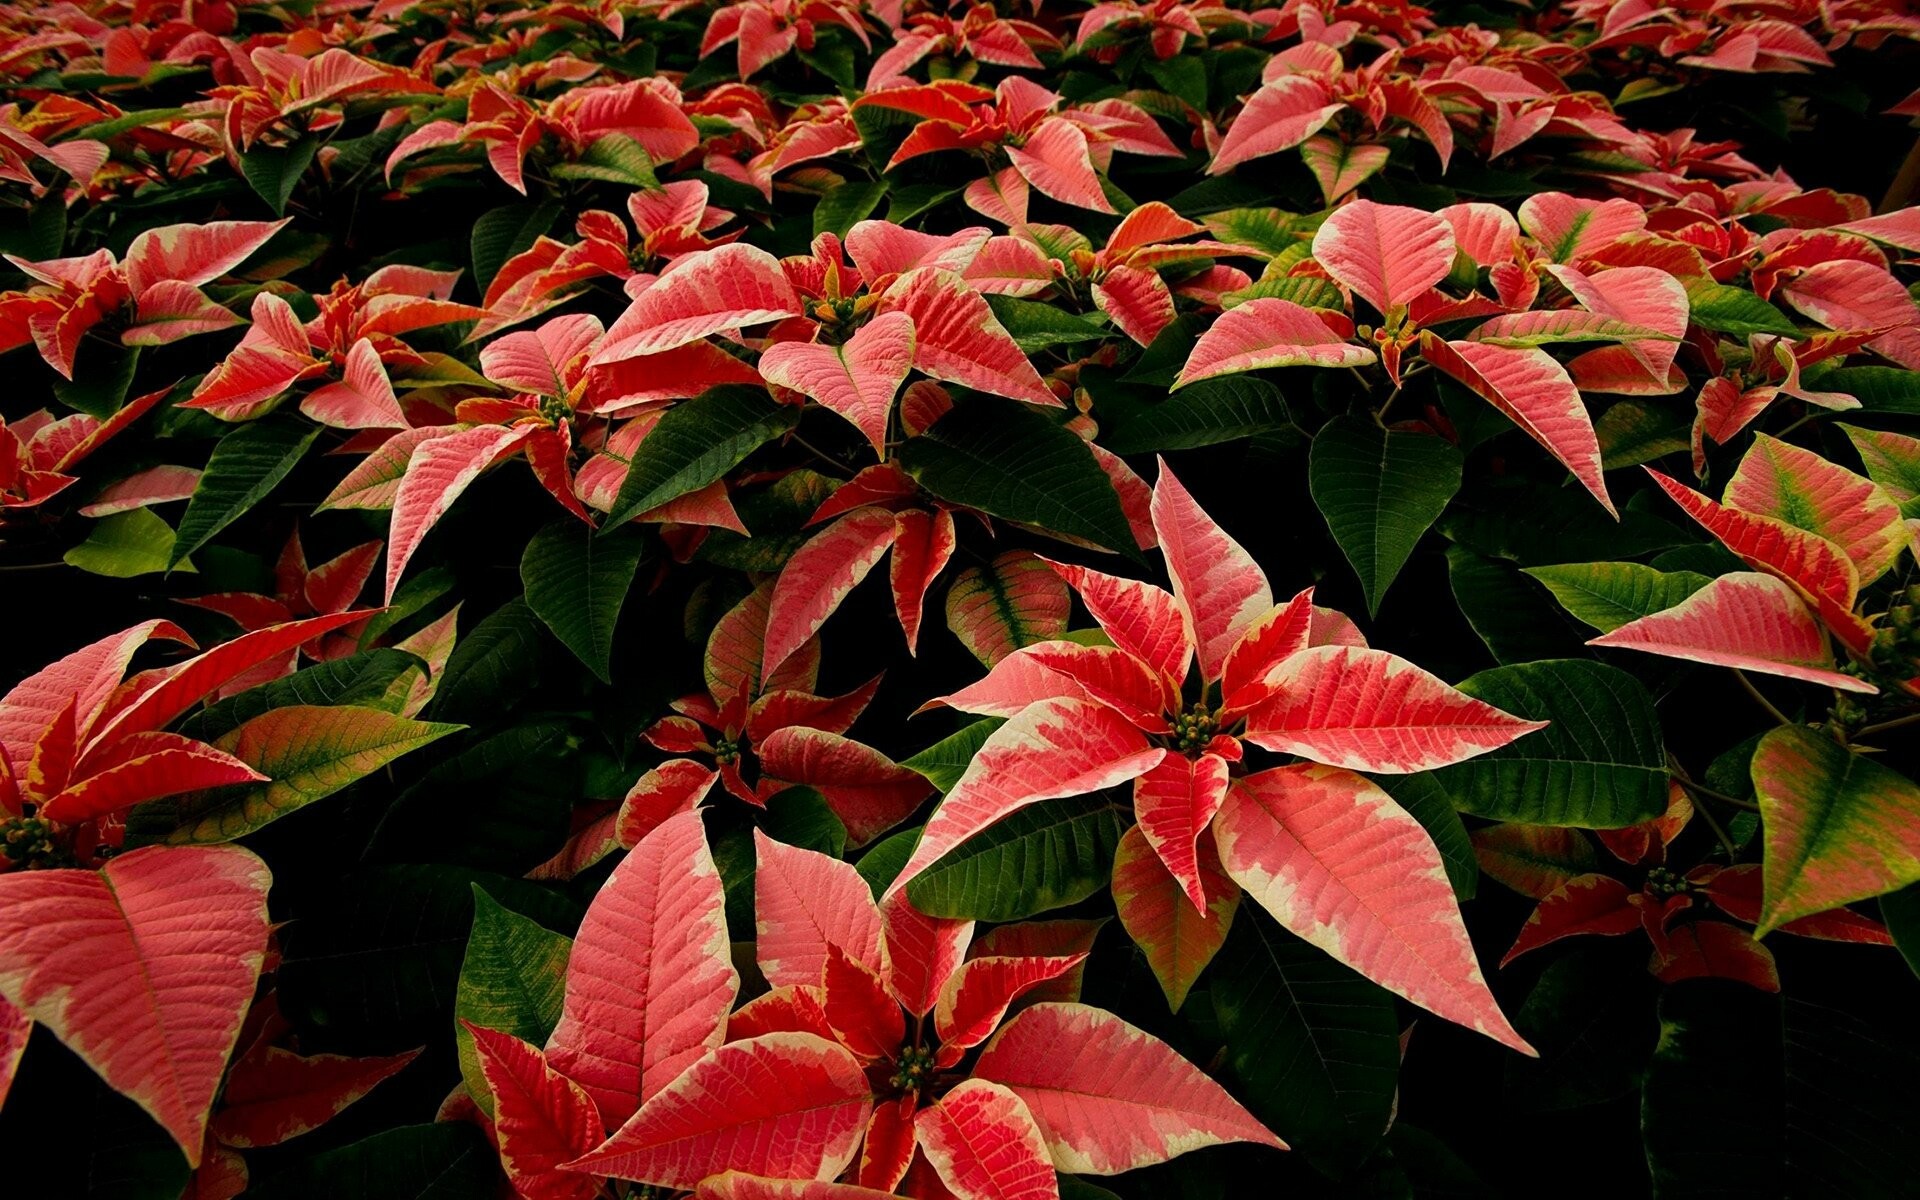 Poinsettia: Very common household plant, especially around the winter holidays. 1920x1200 HD Wallpaper.